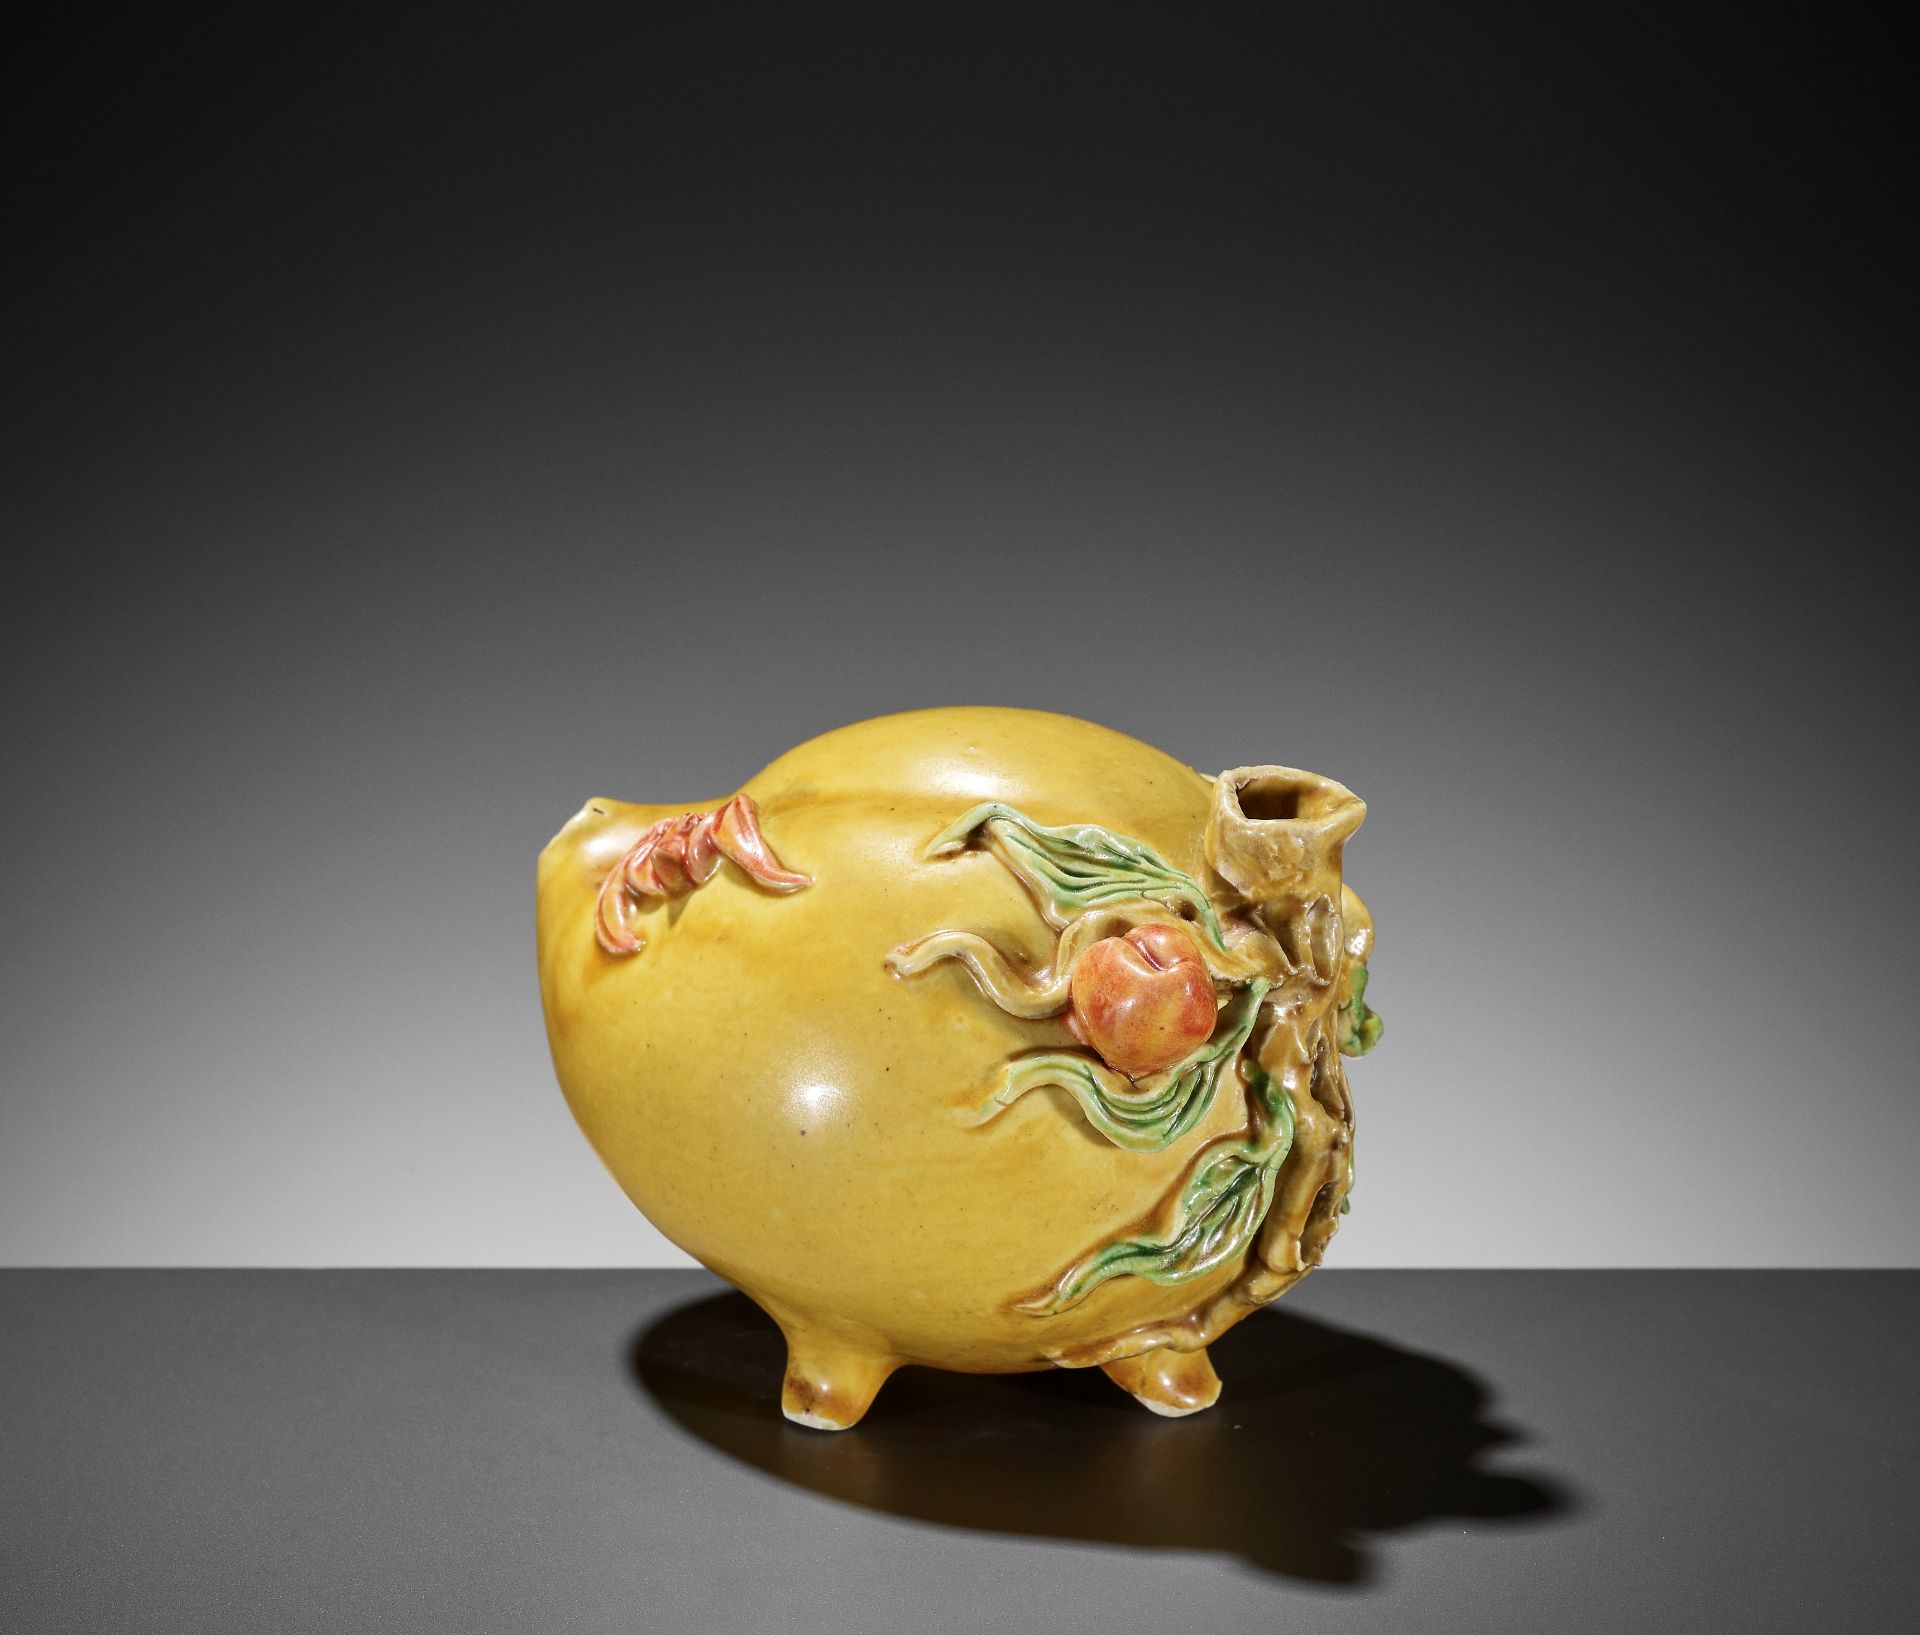 AN IMPERIAL YELLOW GLAZED PEACH-FORM WATER DROPPER, QING DYNASTY